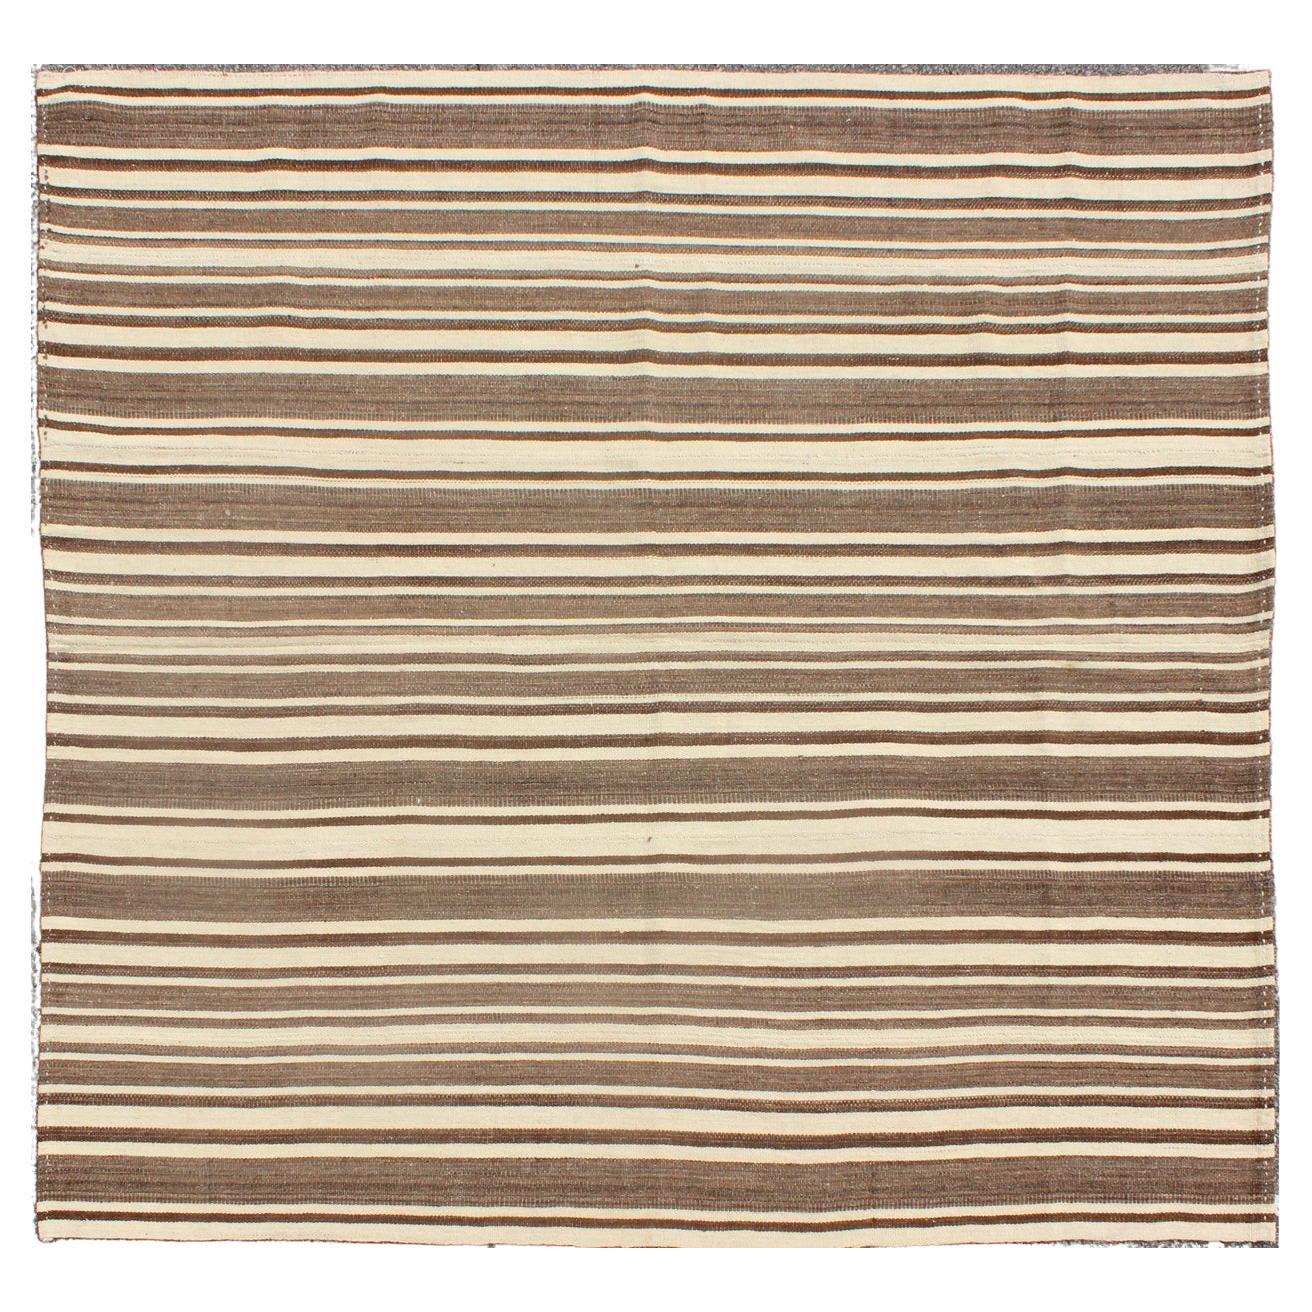 Vintage Turkish Flat-Weave Muted Colored Kilim in Taupe, Brown and Cream